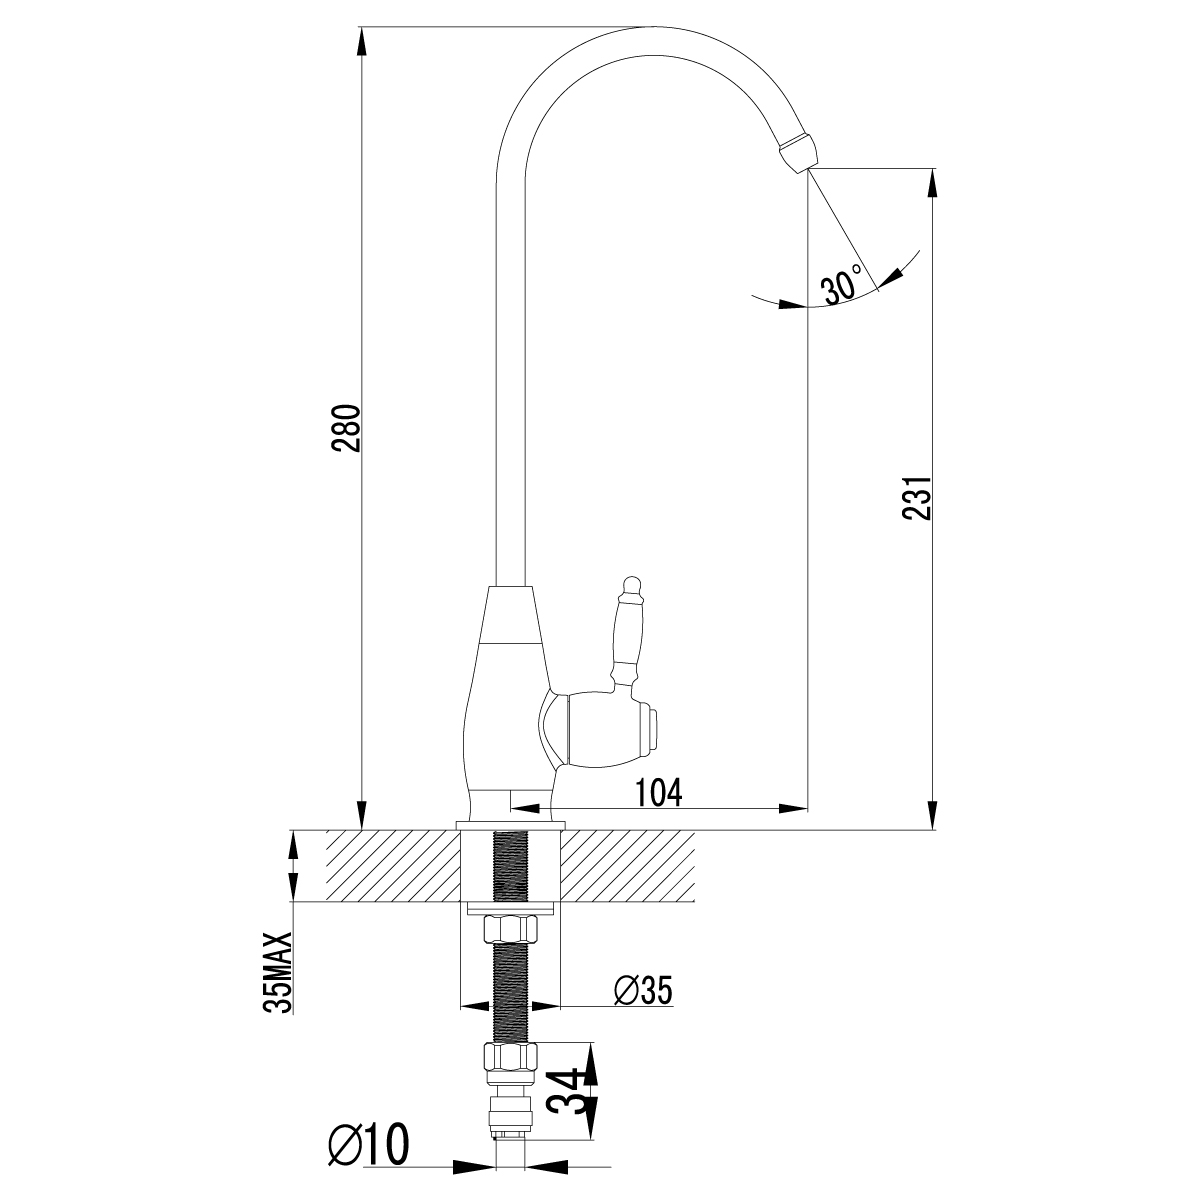 LM4840B Drinking water tap